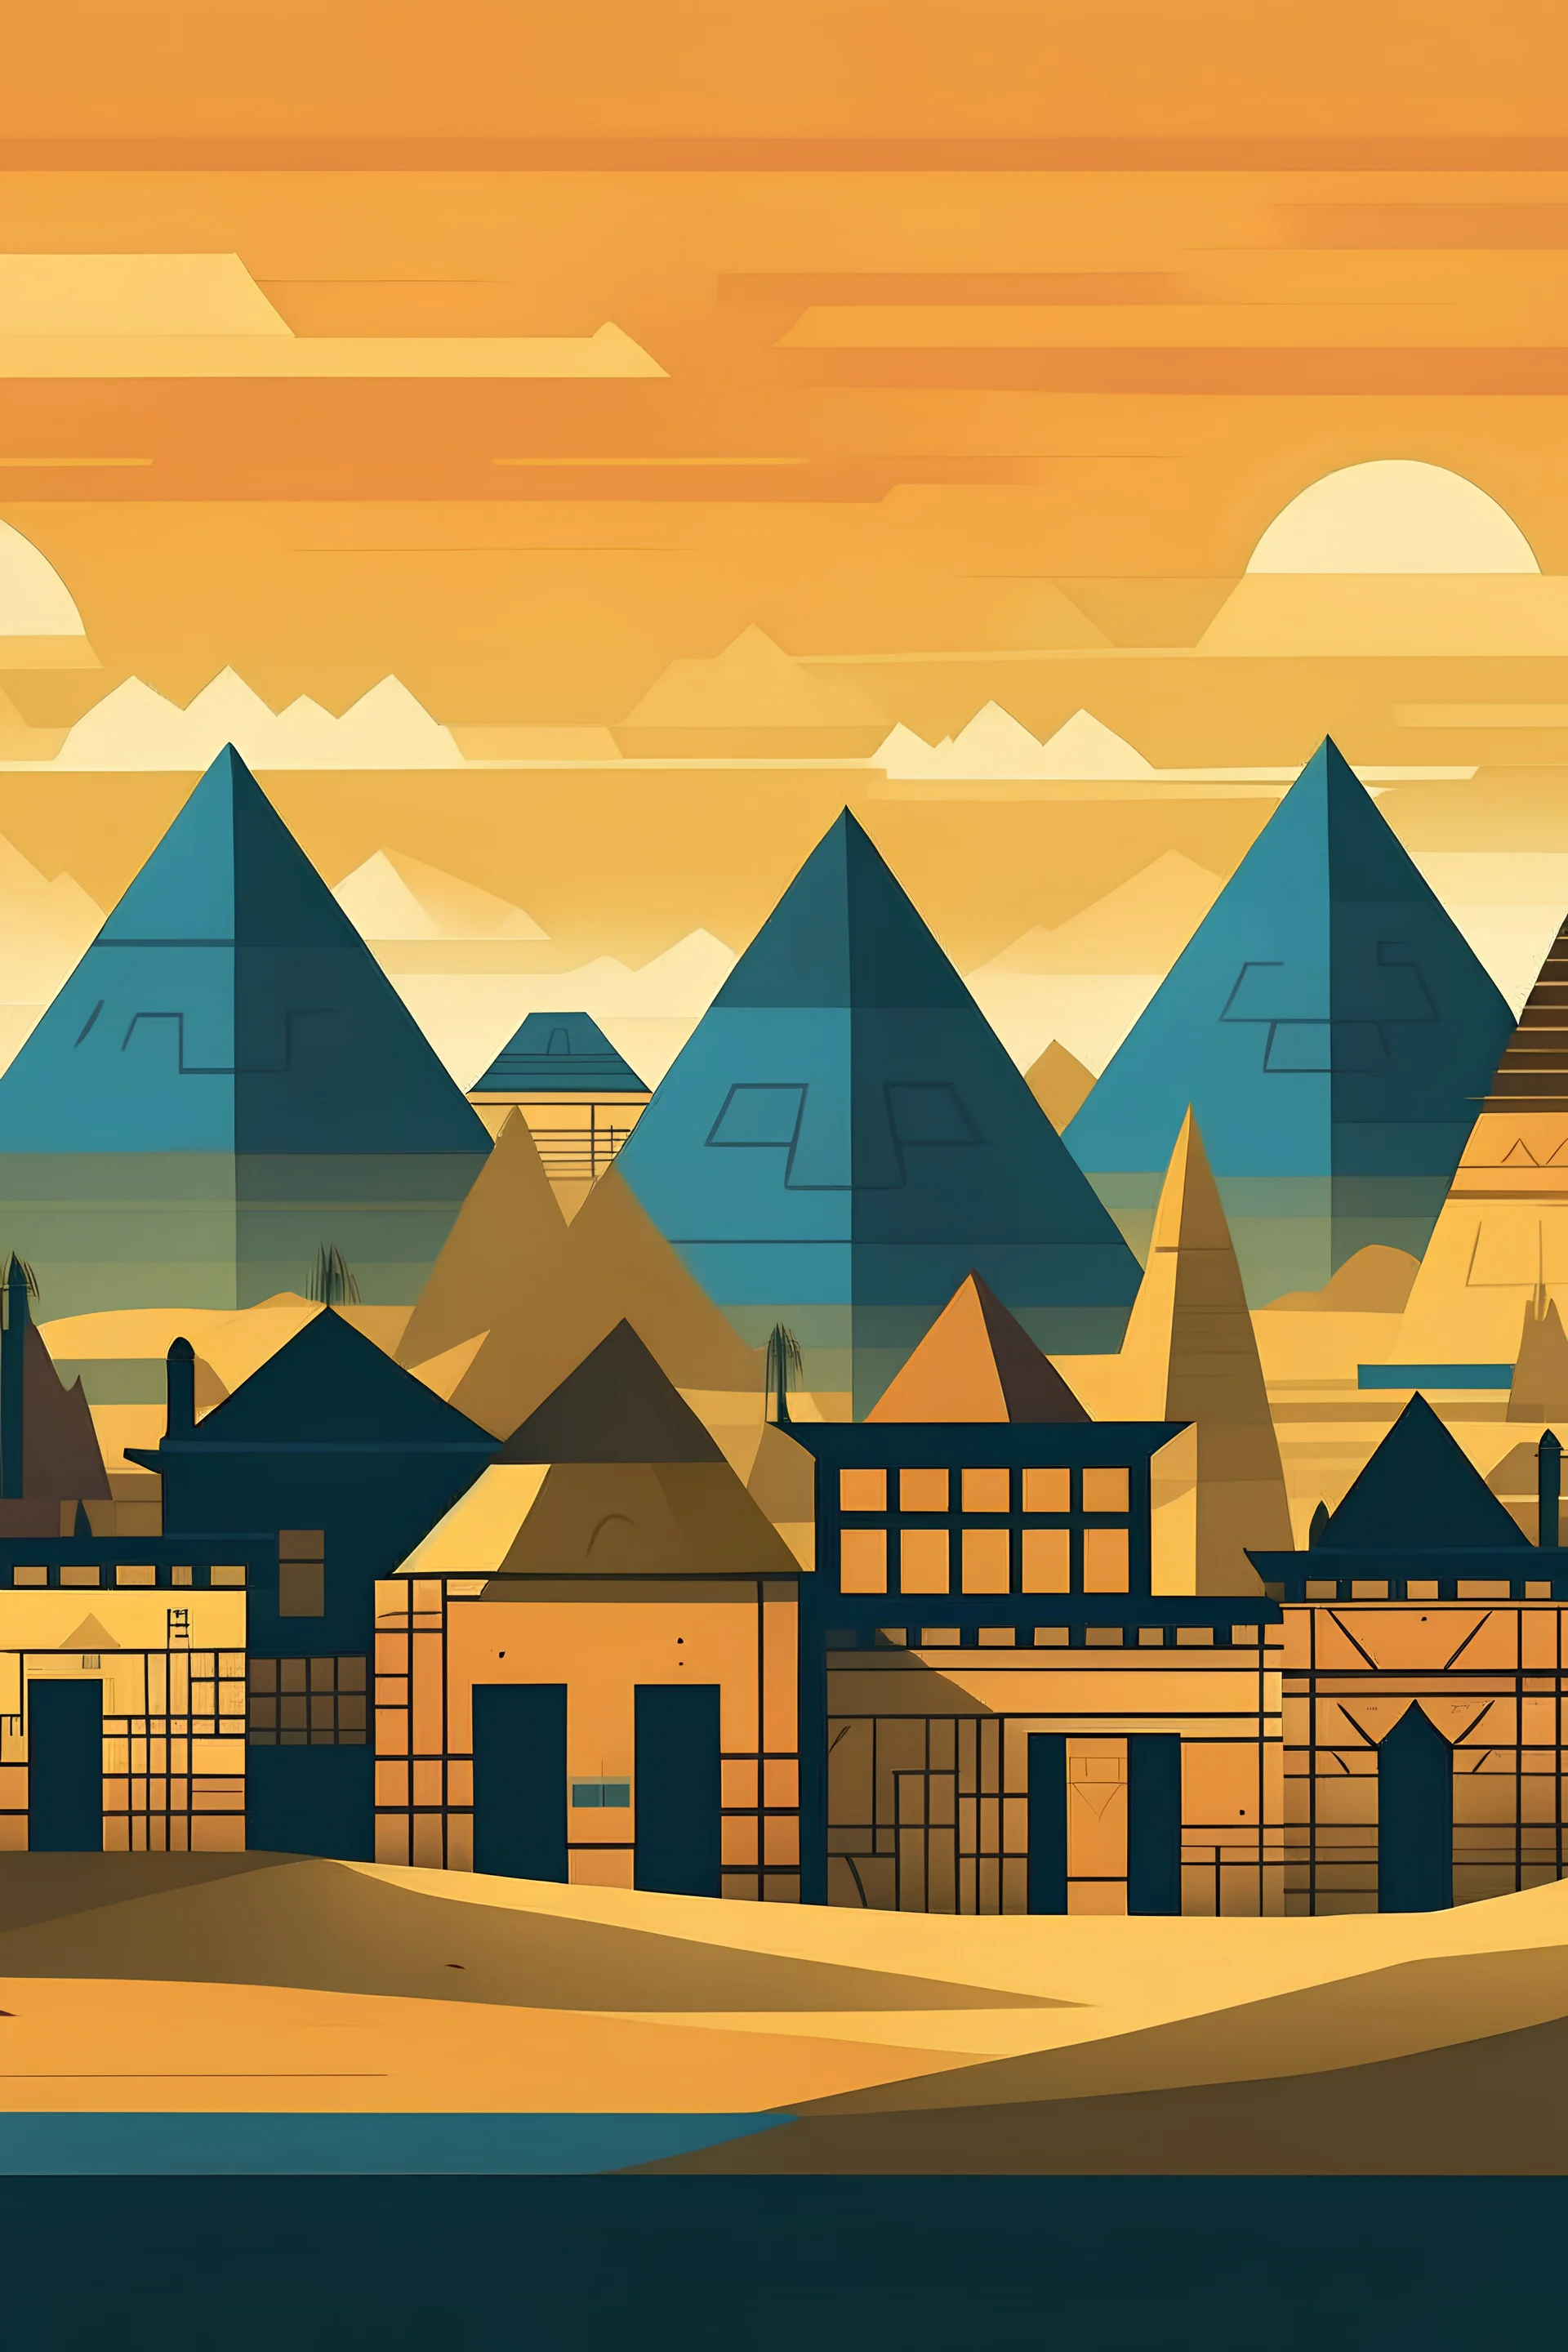 create a ilustrasion town of small Egyptian houses with silhouettes of pyramids behind them in a similar art style and color palette